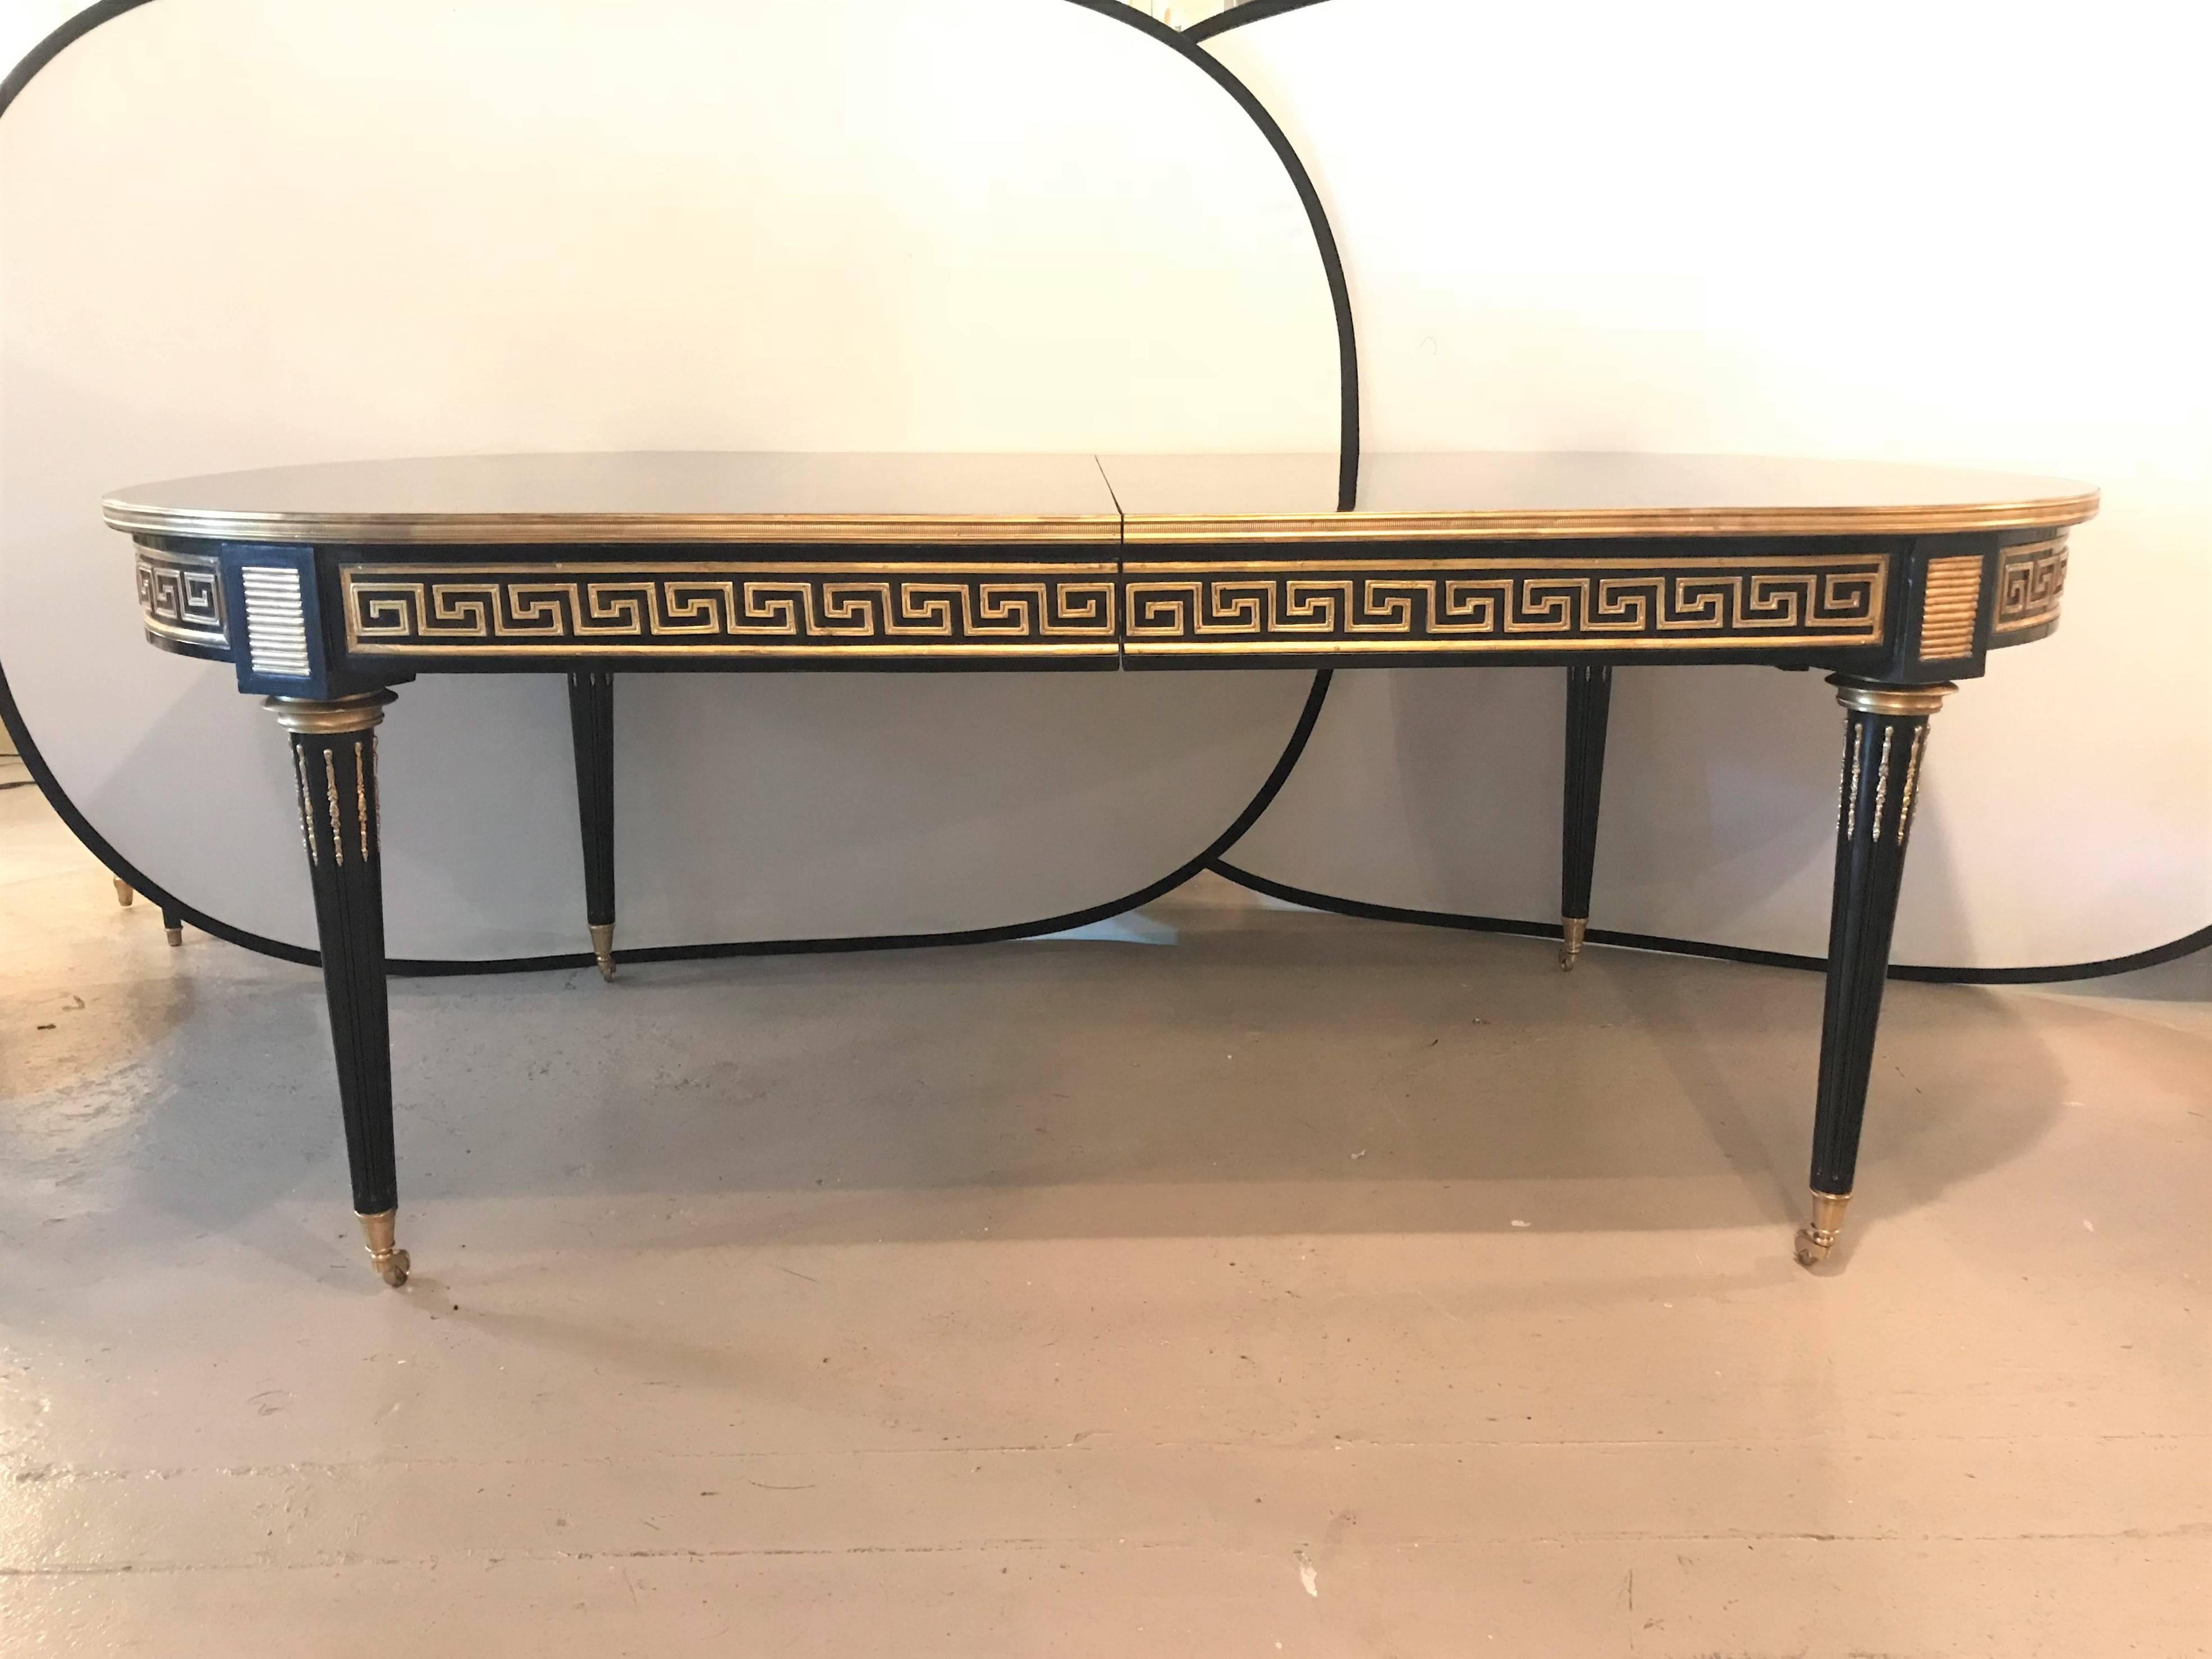 Hollywood Regency at its finest in this one of a kind Maison Jansen inspired 12 foot bronze-mounted Greek key design dining room table each of the three bronze-mounted leaves measure 19.5 inches. This table at almost four feet wide and 84 inches